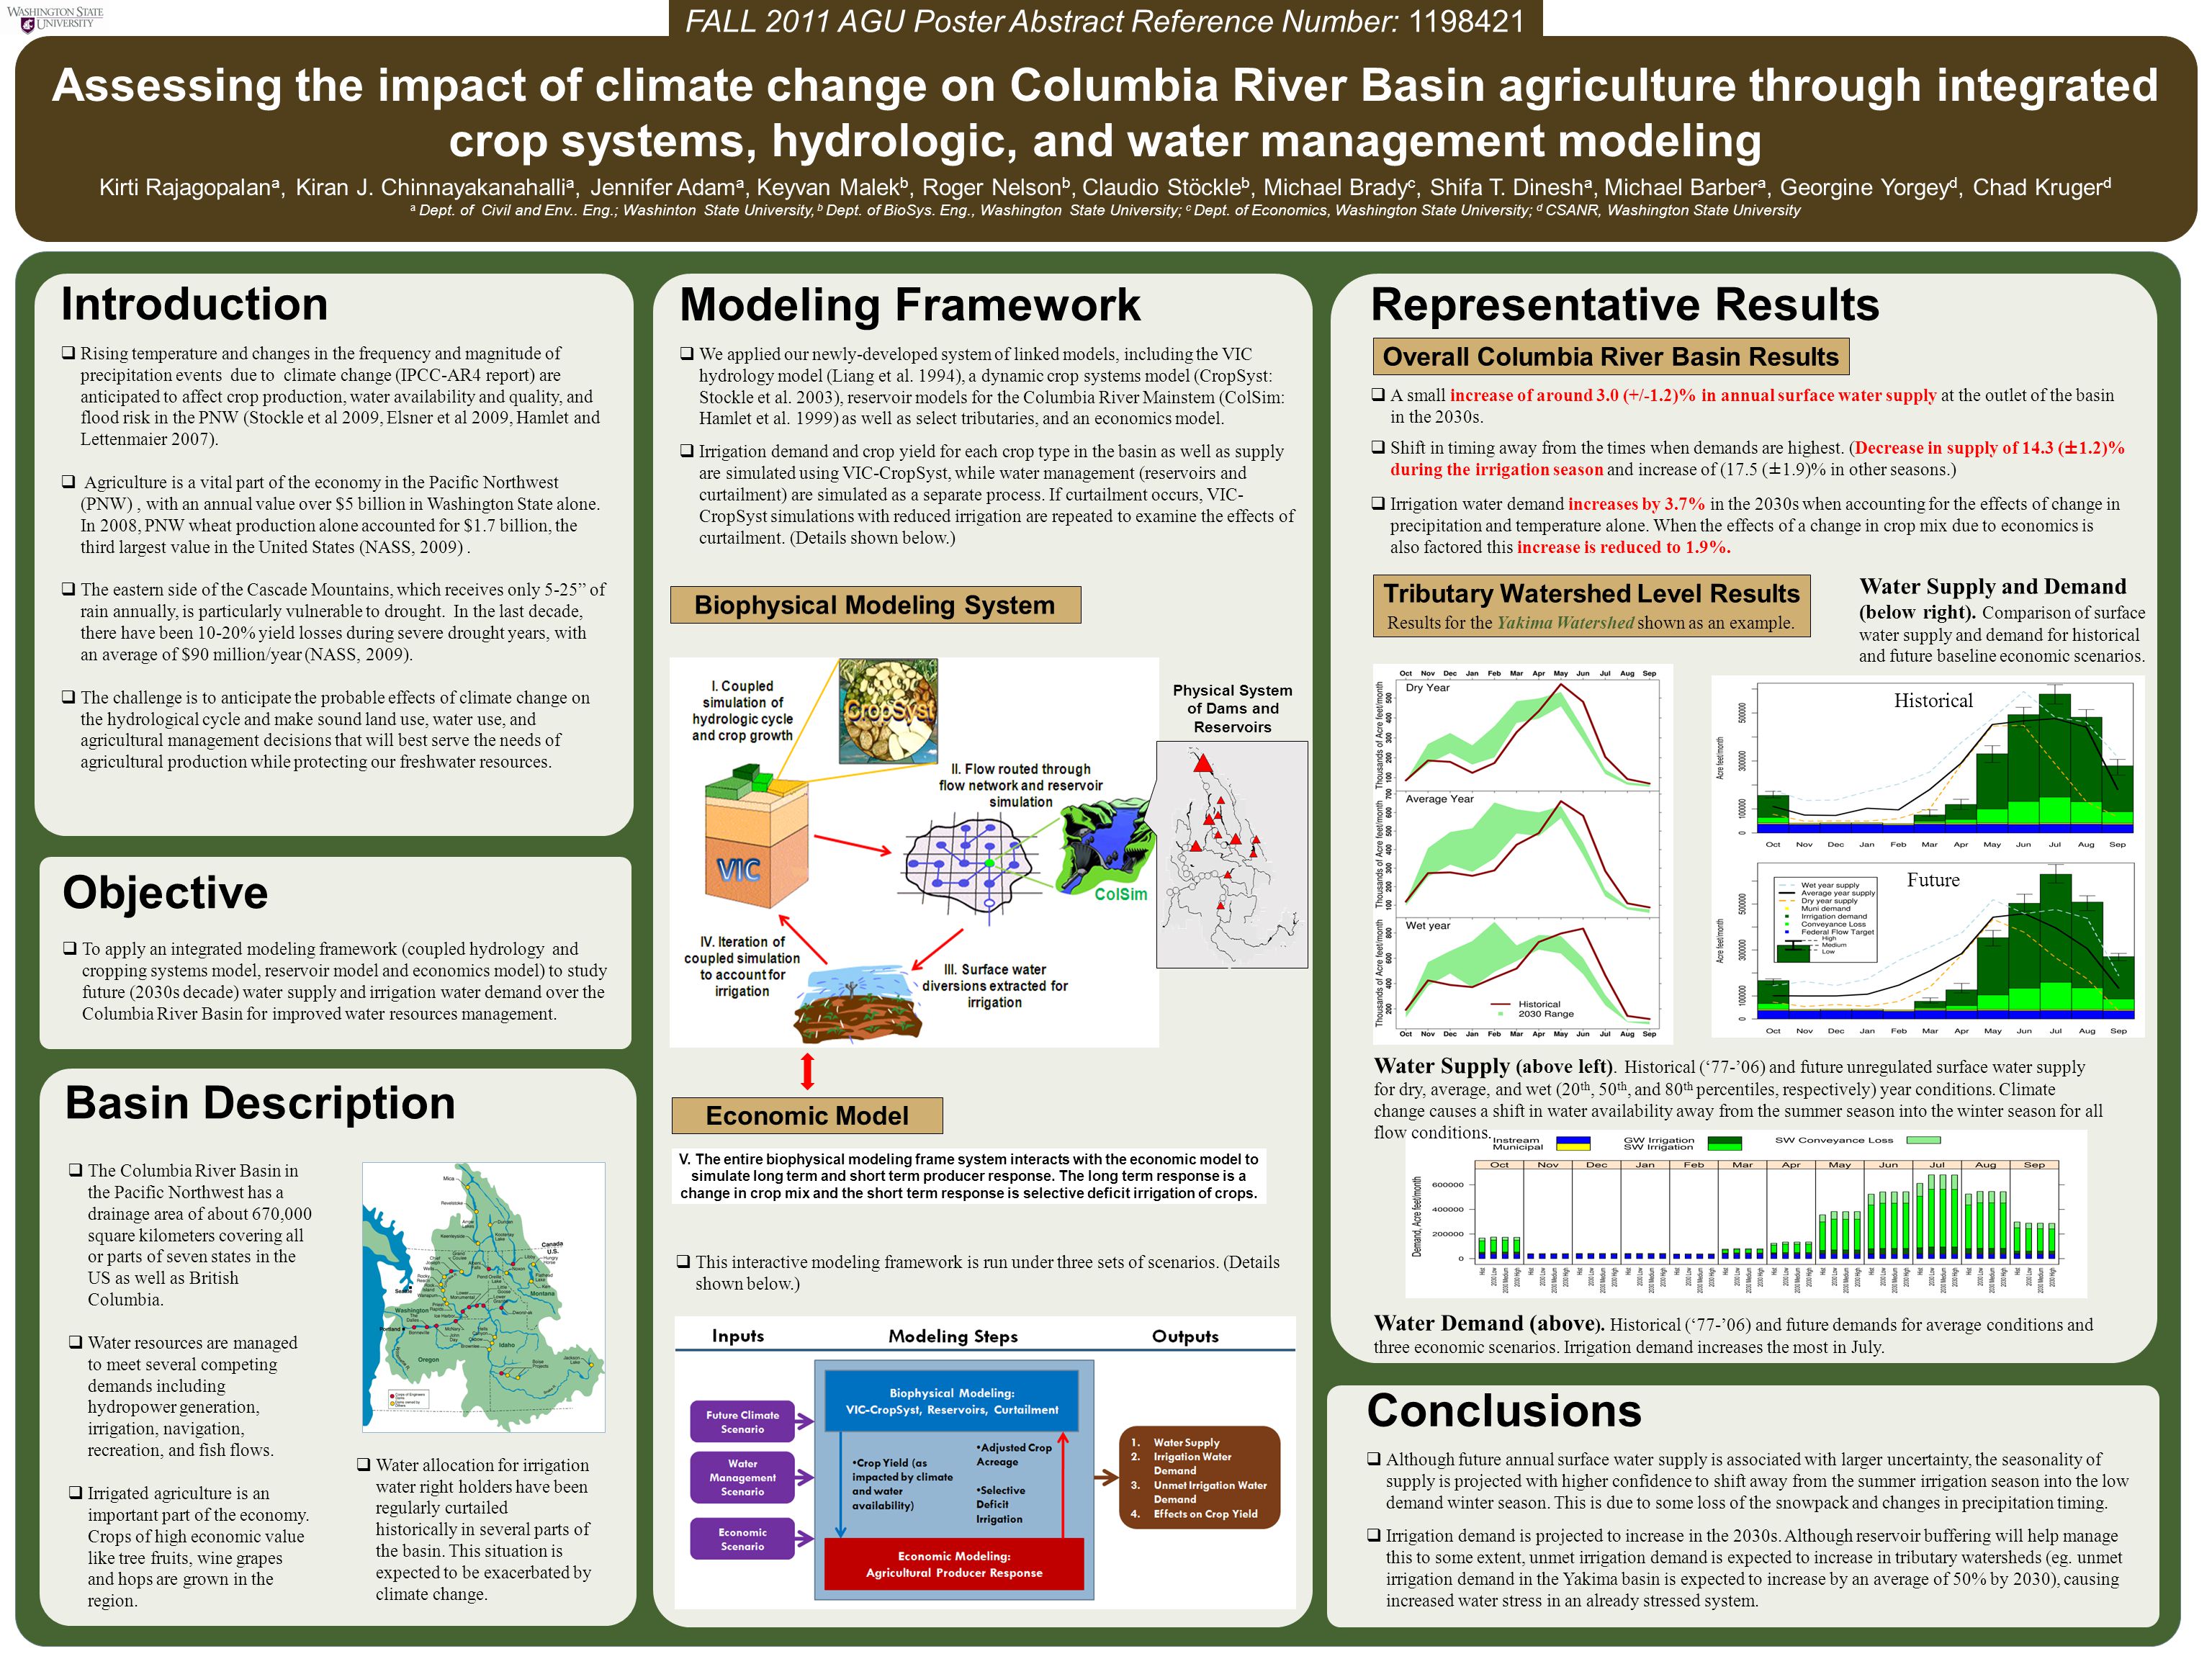 Introduction  Rising temperature and changes in the frequency and magnitude of precipitation events due to climate change (IPCC-AR4 report) are anticipated to affect crop production, water availability and quality, and flood risk in the PNW (Stockle et al 2009, Elsner et al 2009, Hamlet and Lettenmaier 2007).